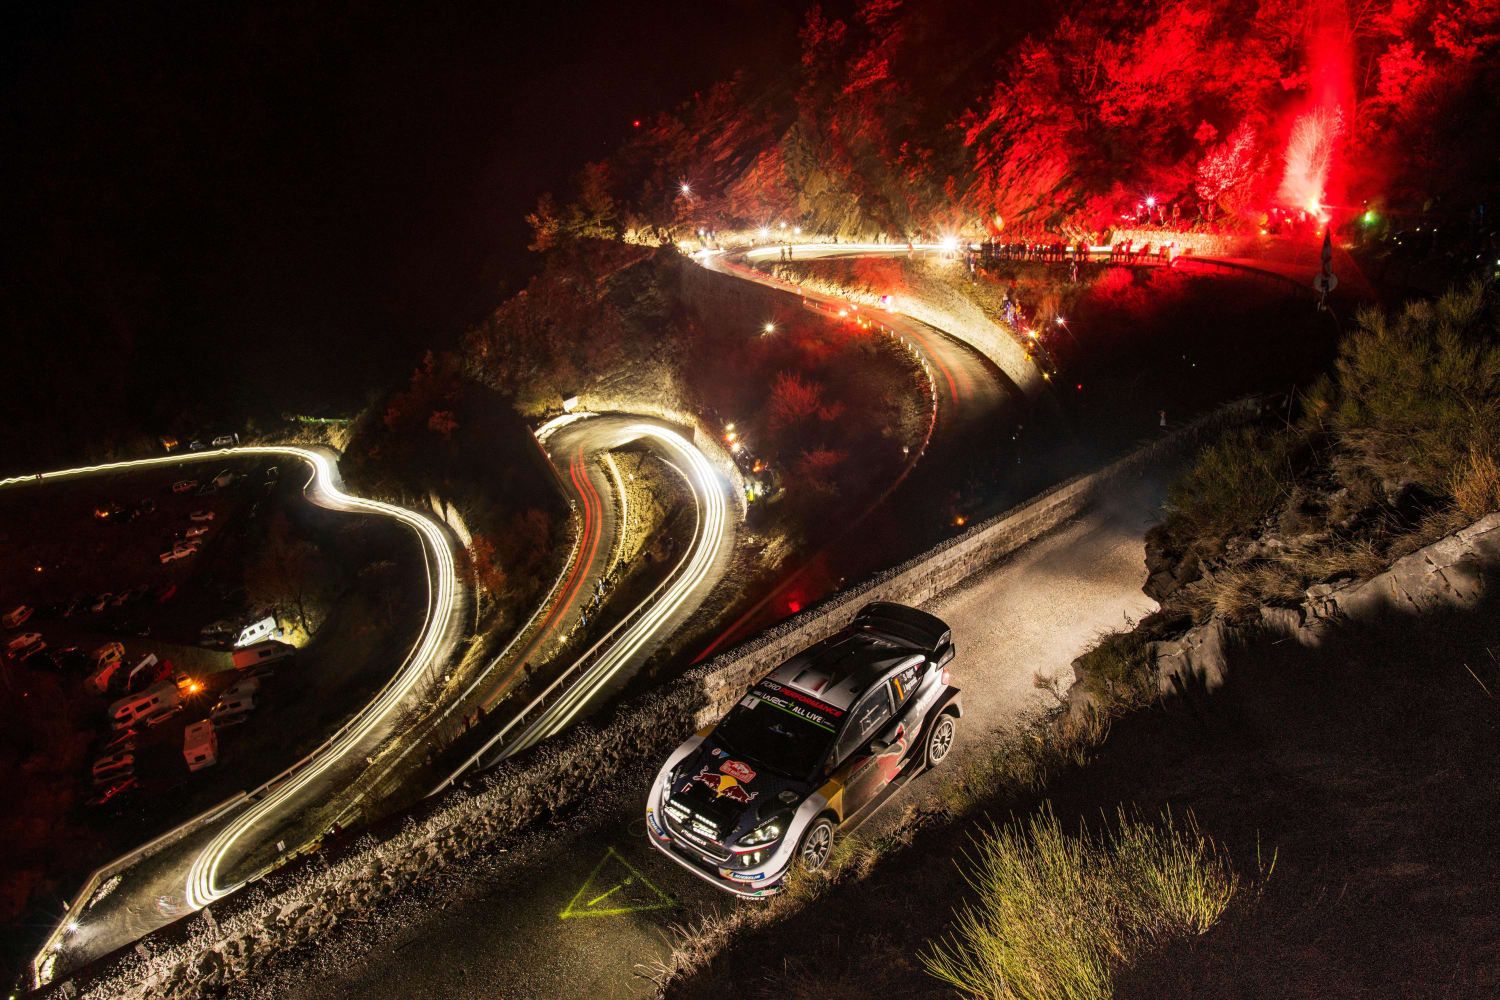 Check out some amazing WRC image